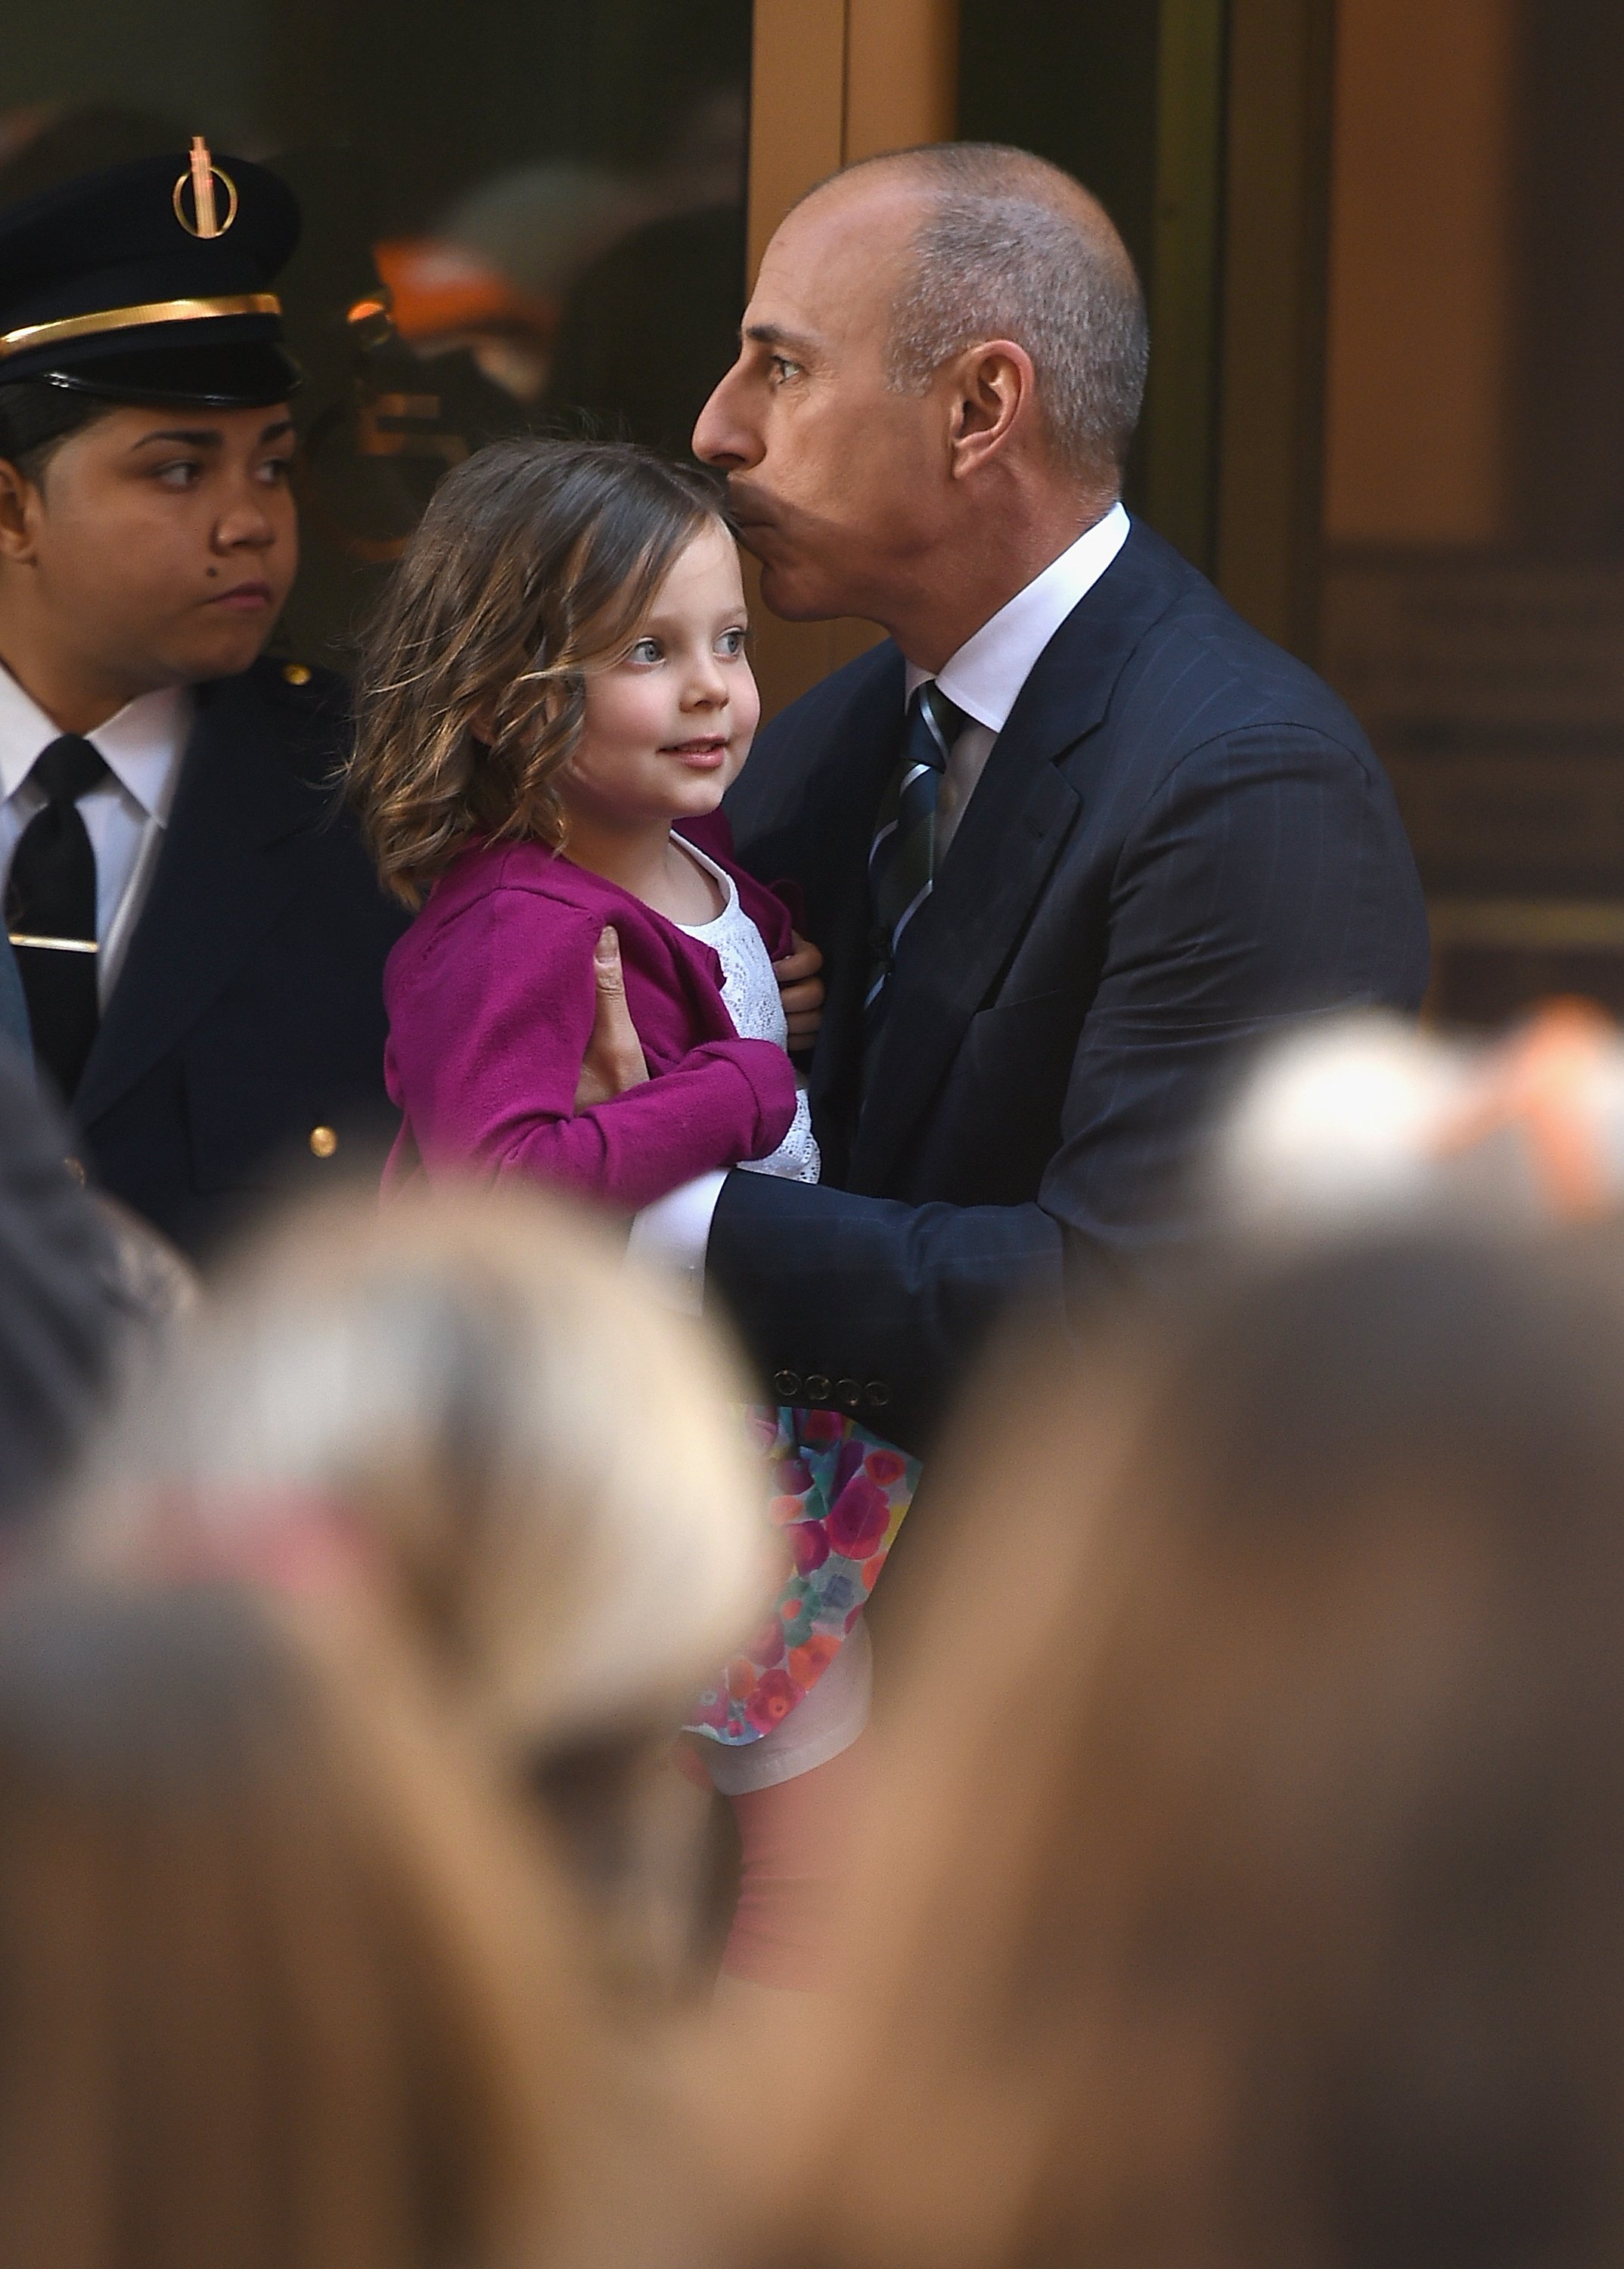 Matt Lauer and his daughter at NBC's Today on May 22, 2015 in New York | Photo: Dimitrios Kambouris/Getty Images